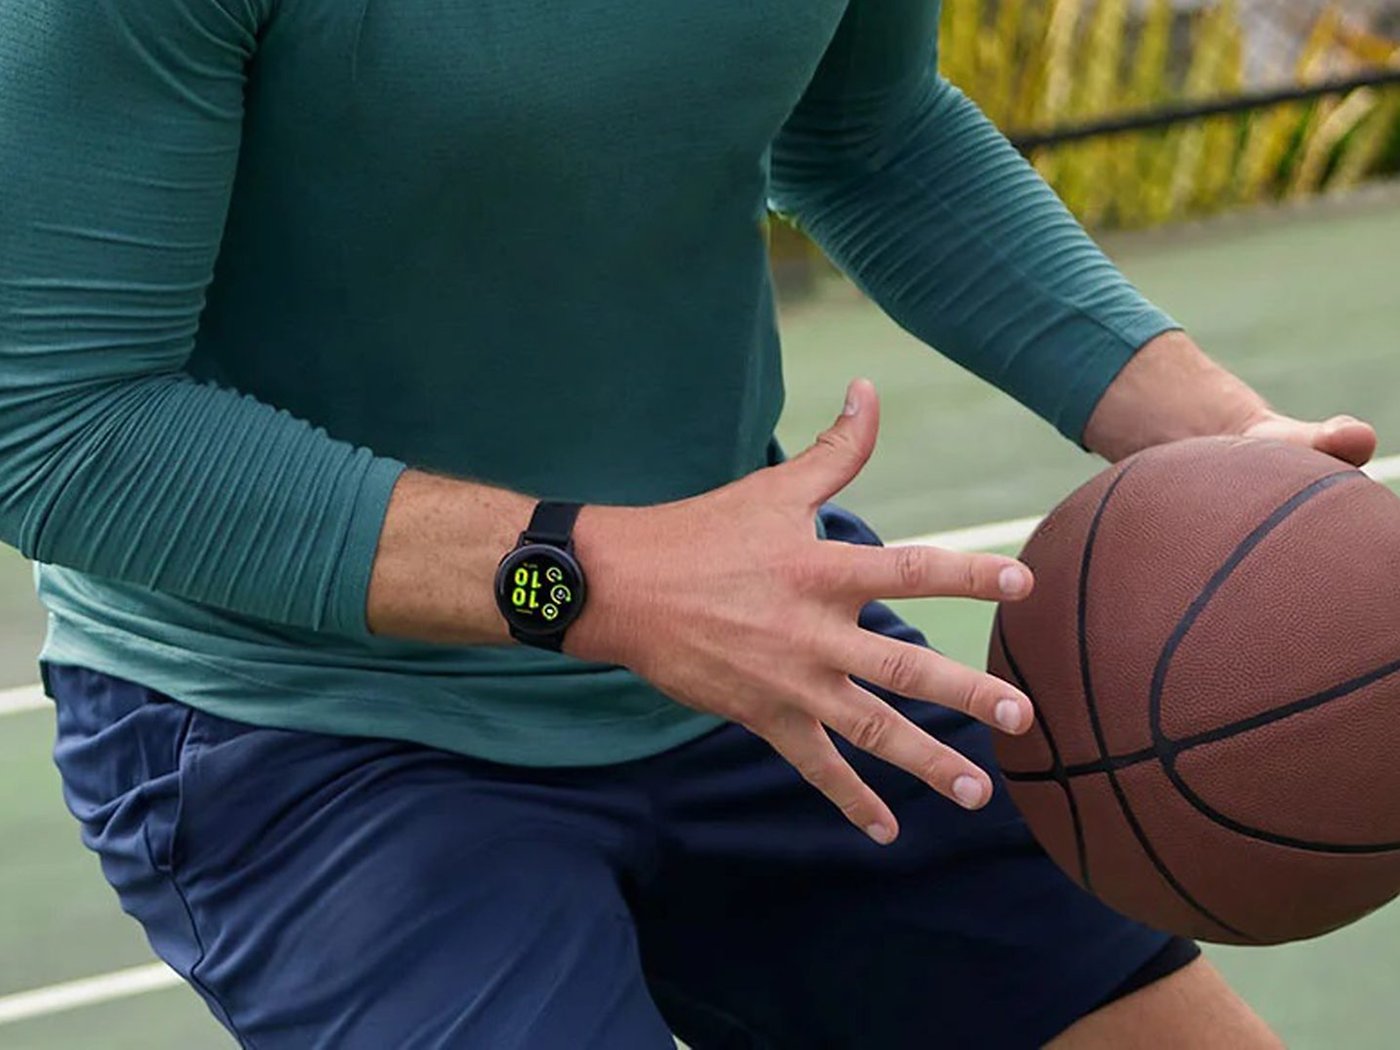 New Garmin Vivoactive 5 GPS smartwatch launches with 11-day battery life -   News